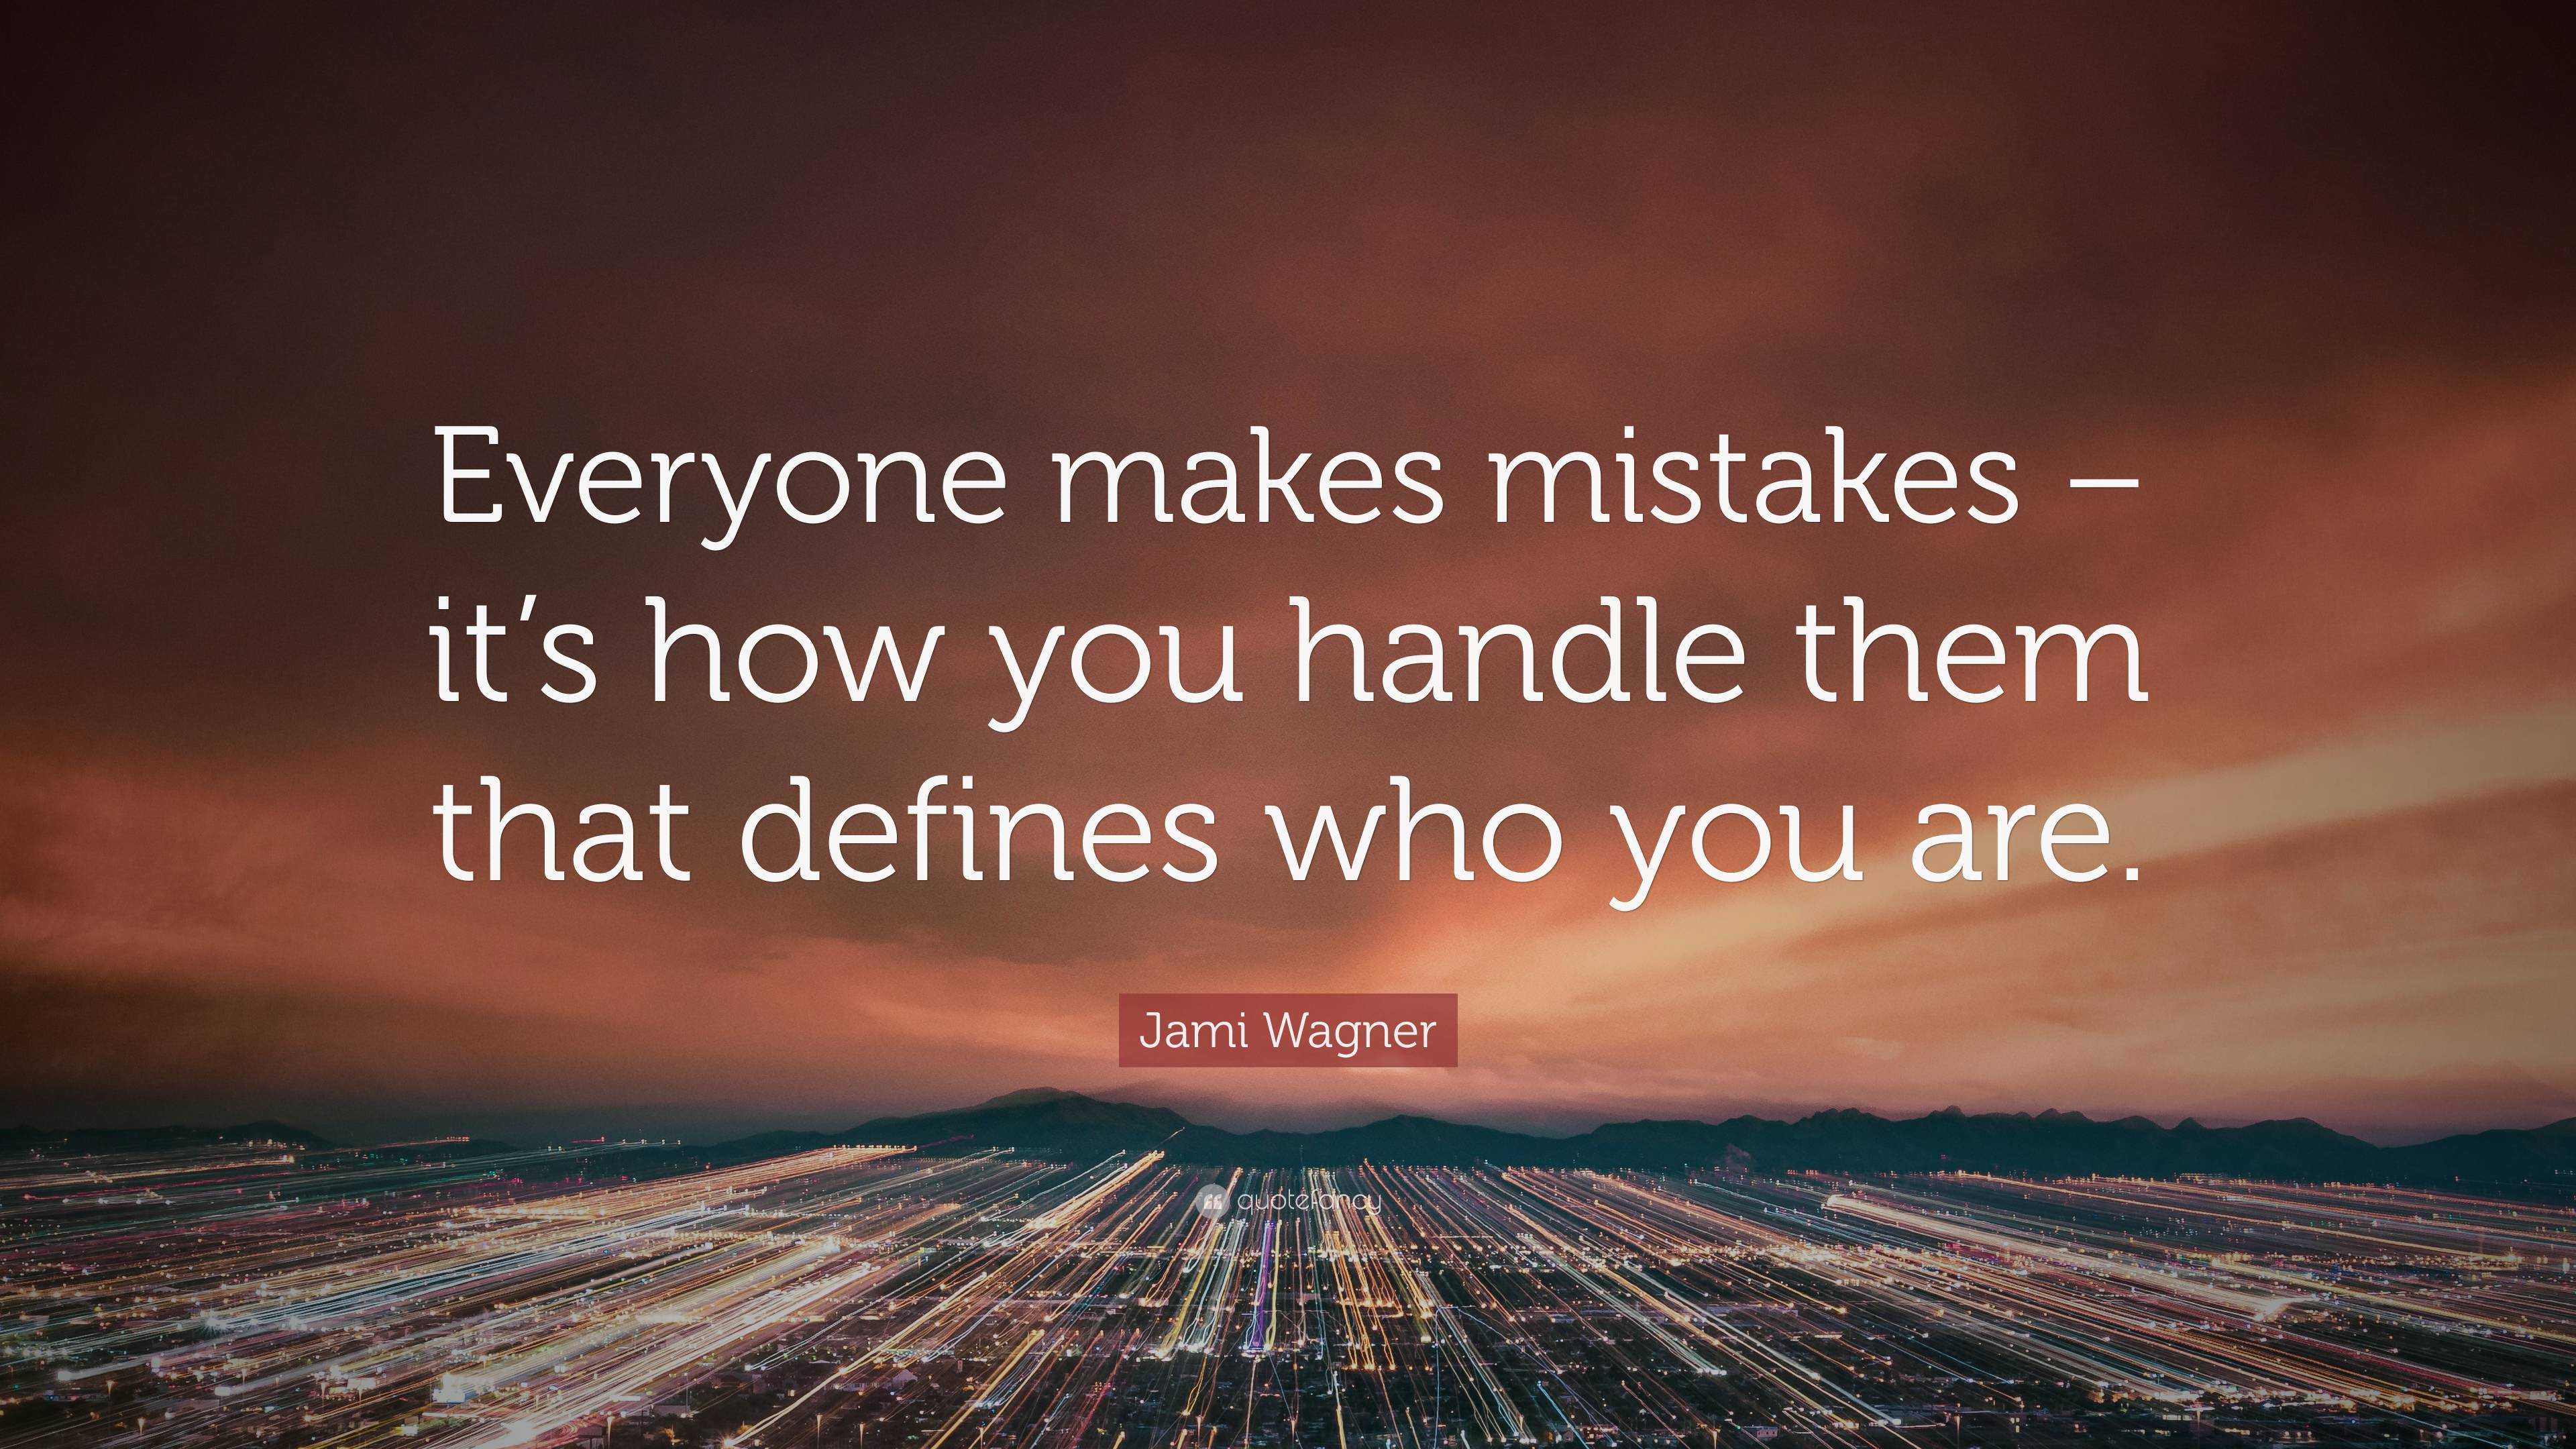 Jami Wagner Quote: “Everyone makes mistakes – it’s how you handle them ...